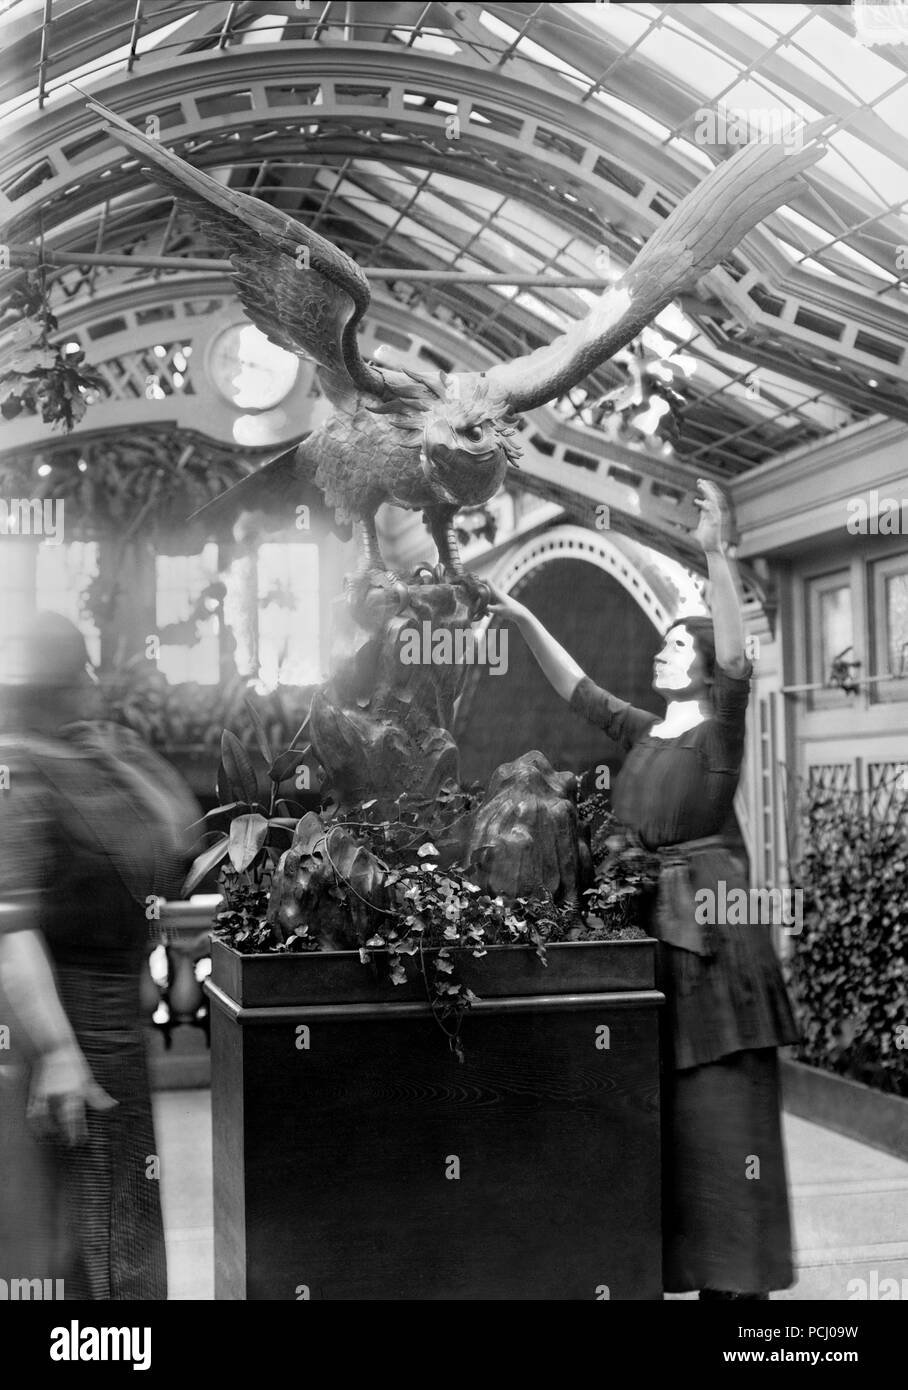 Helen Keller, with her teacher and companion Anne Sullivan Macy, reaches out to touch an eagle display at the International Flower Show April 1913 in New York City, New York. Helen Keller (June 27, 1880 – June 1, 1968) was an American author, political activist, and lecturer. She was the first deaf-blind person to earn a bachelor of arts degree. Stock Photo